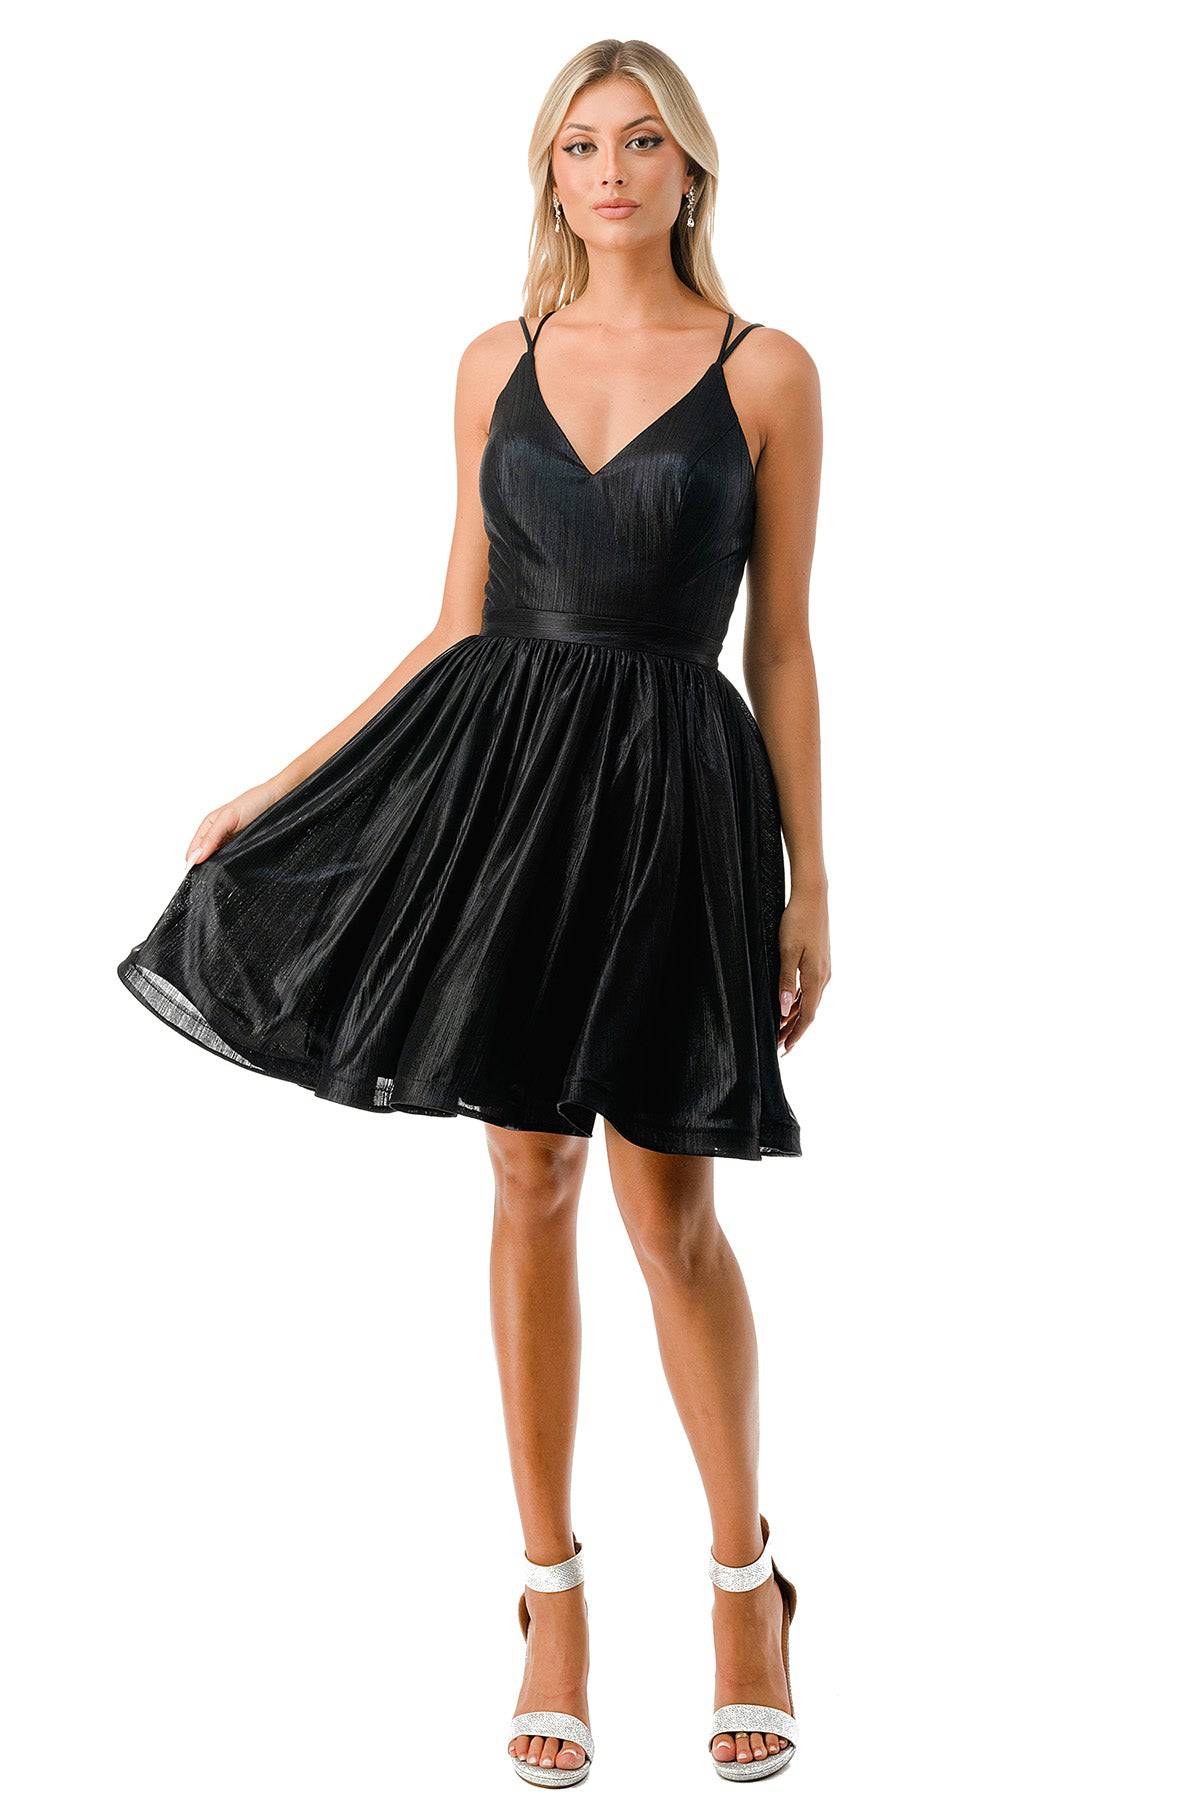 Aspeed S2750Y Stunning Pleated V Neck Short Dress | 6 Colors - NORMA REED